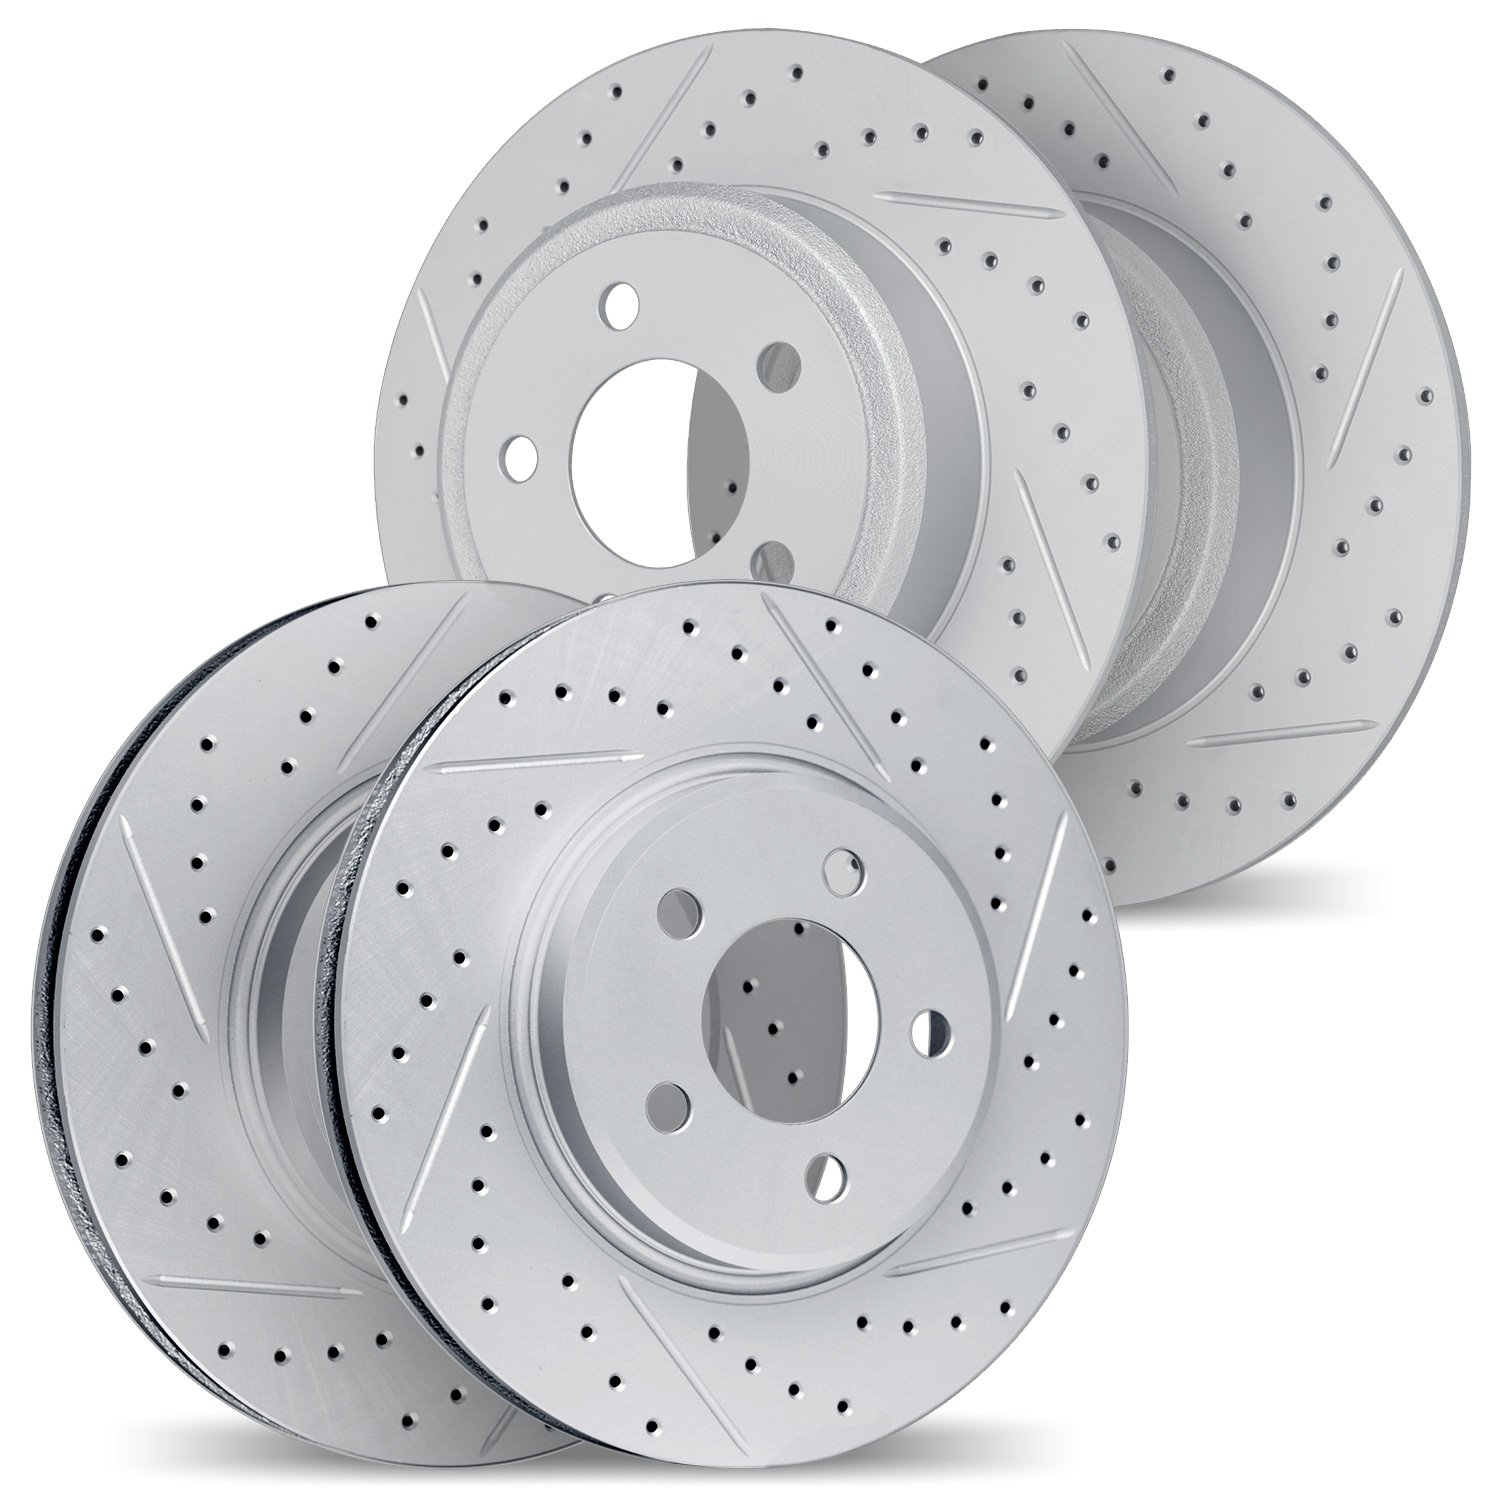 2004-76075 Geoperformance Drilled/Slotted Brake Rotors, 2009-2015 Lexus/Toyota/Scion, Position: Front and Rear